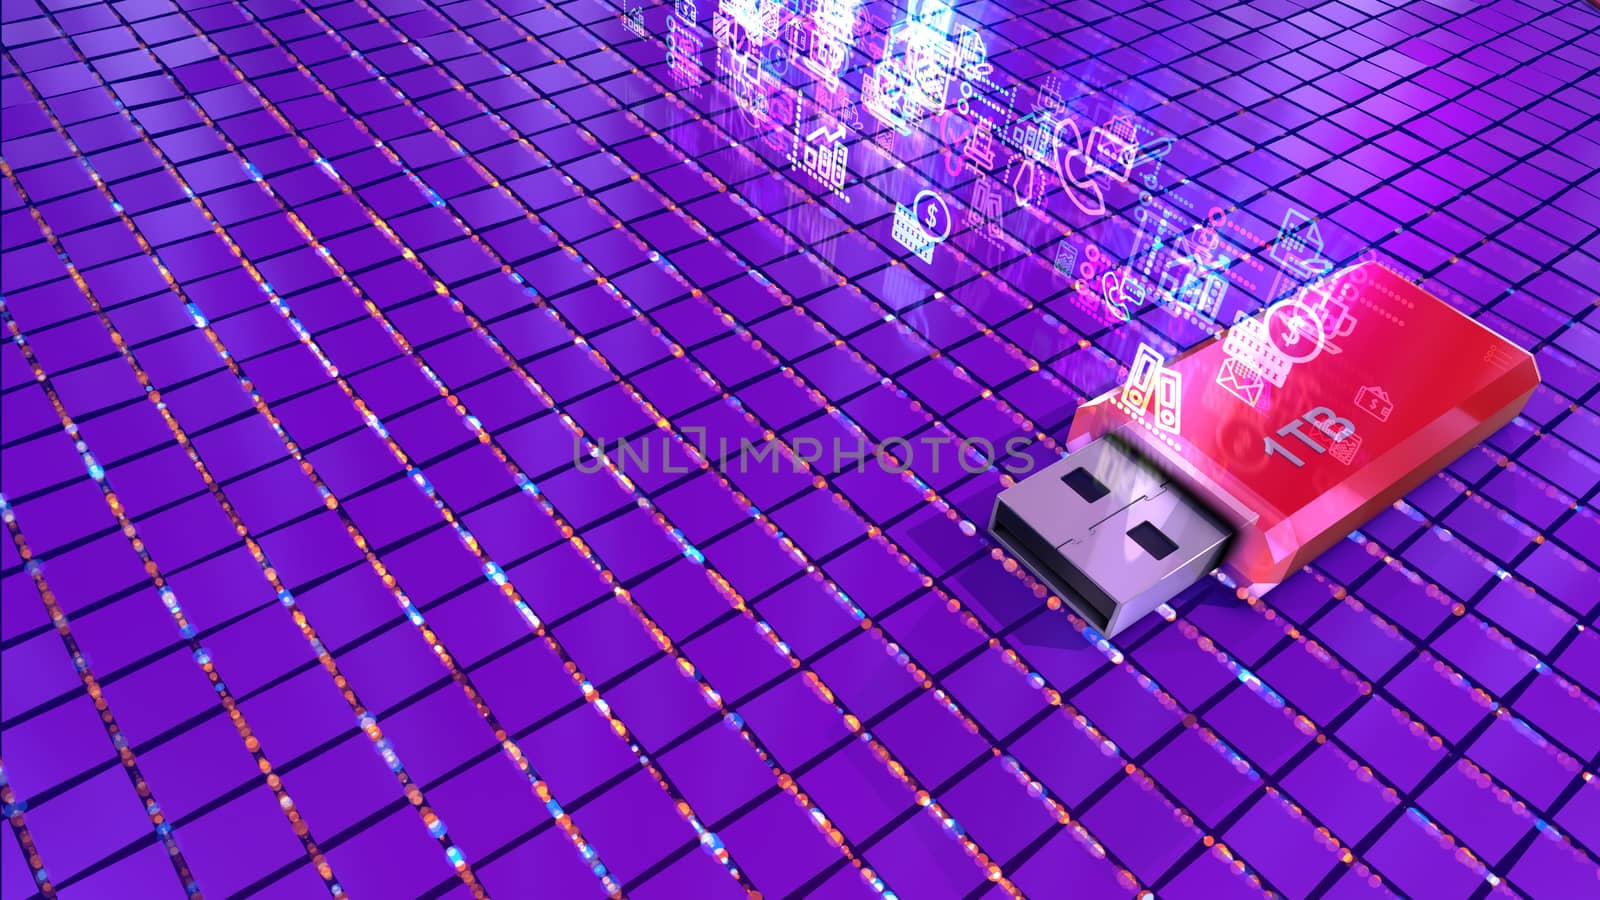 Original 3d illustration of one red flash drive placed on a violet platform and covered with a cobweb of wires and transparent icons and signs.